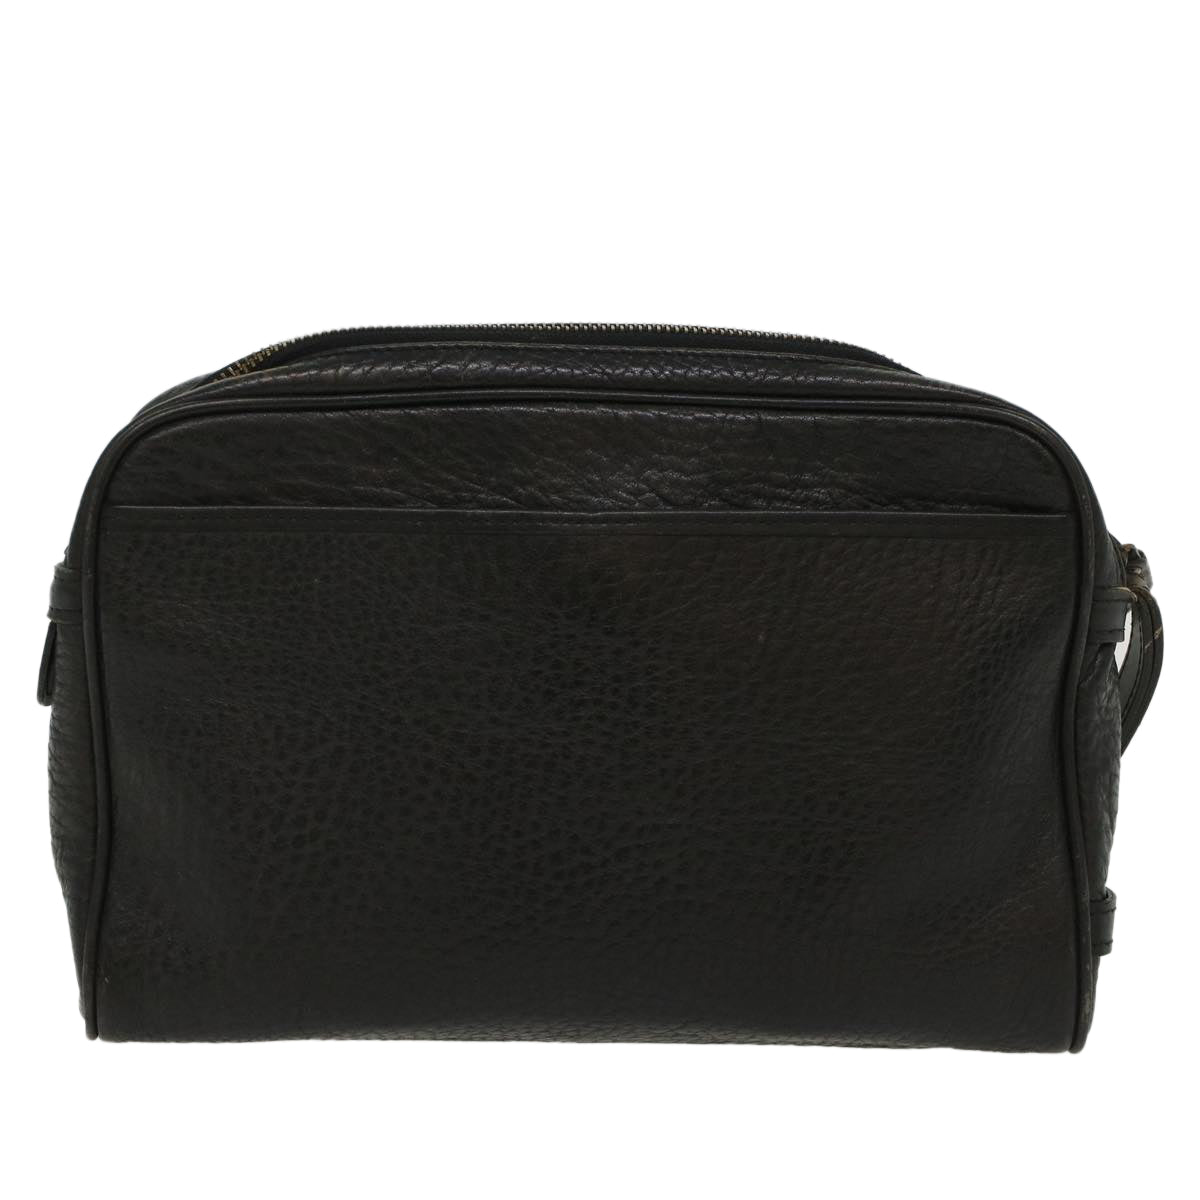 Burberrys Clutch Bag Leather Black Auth bs6215 - 0